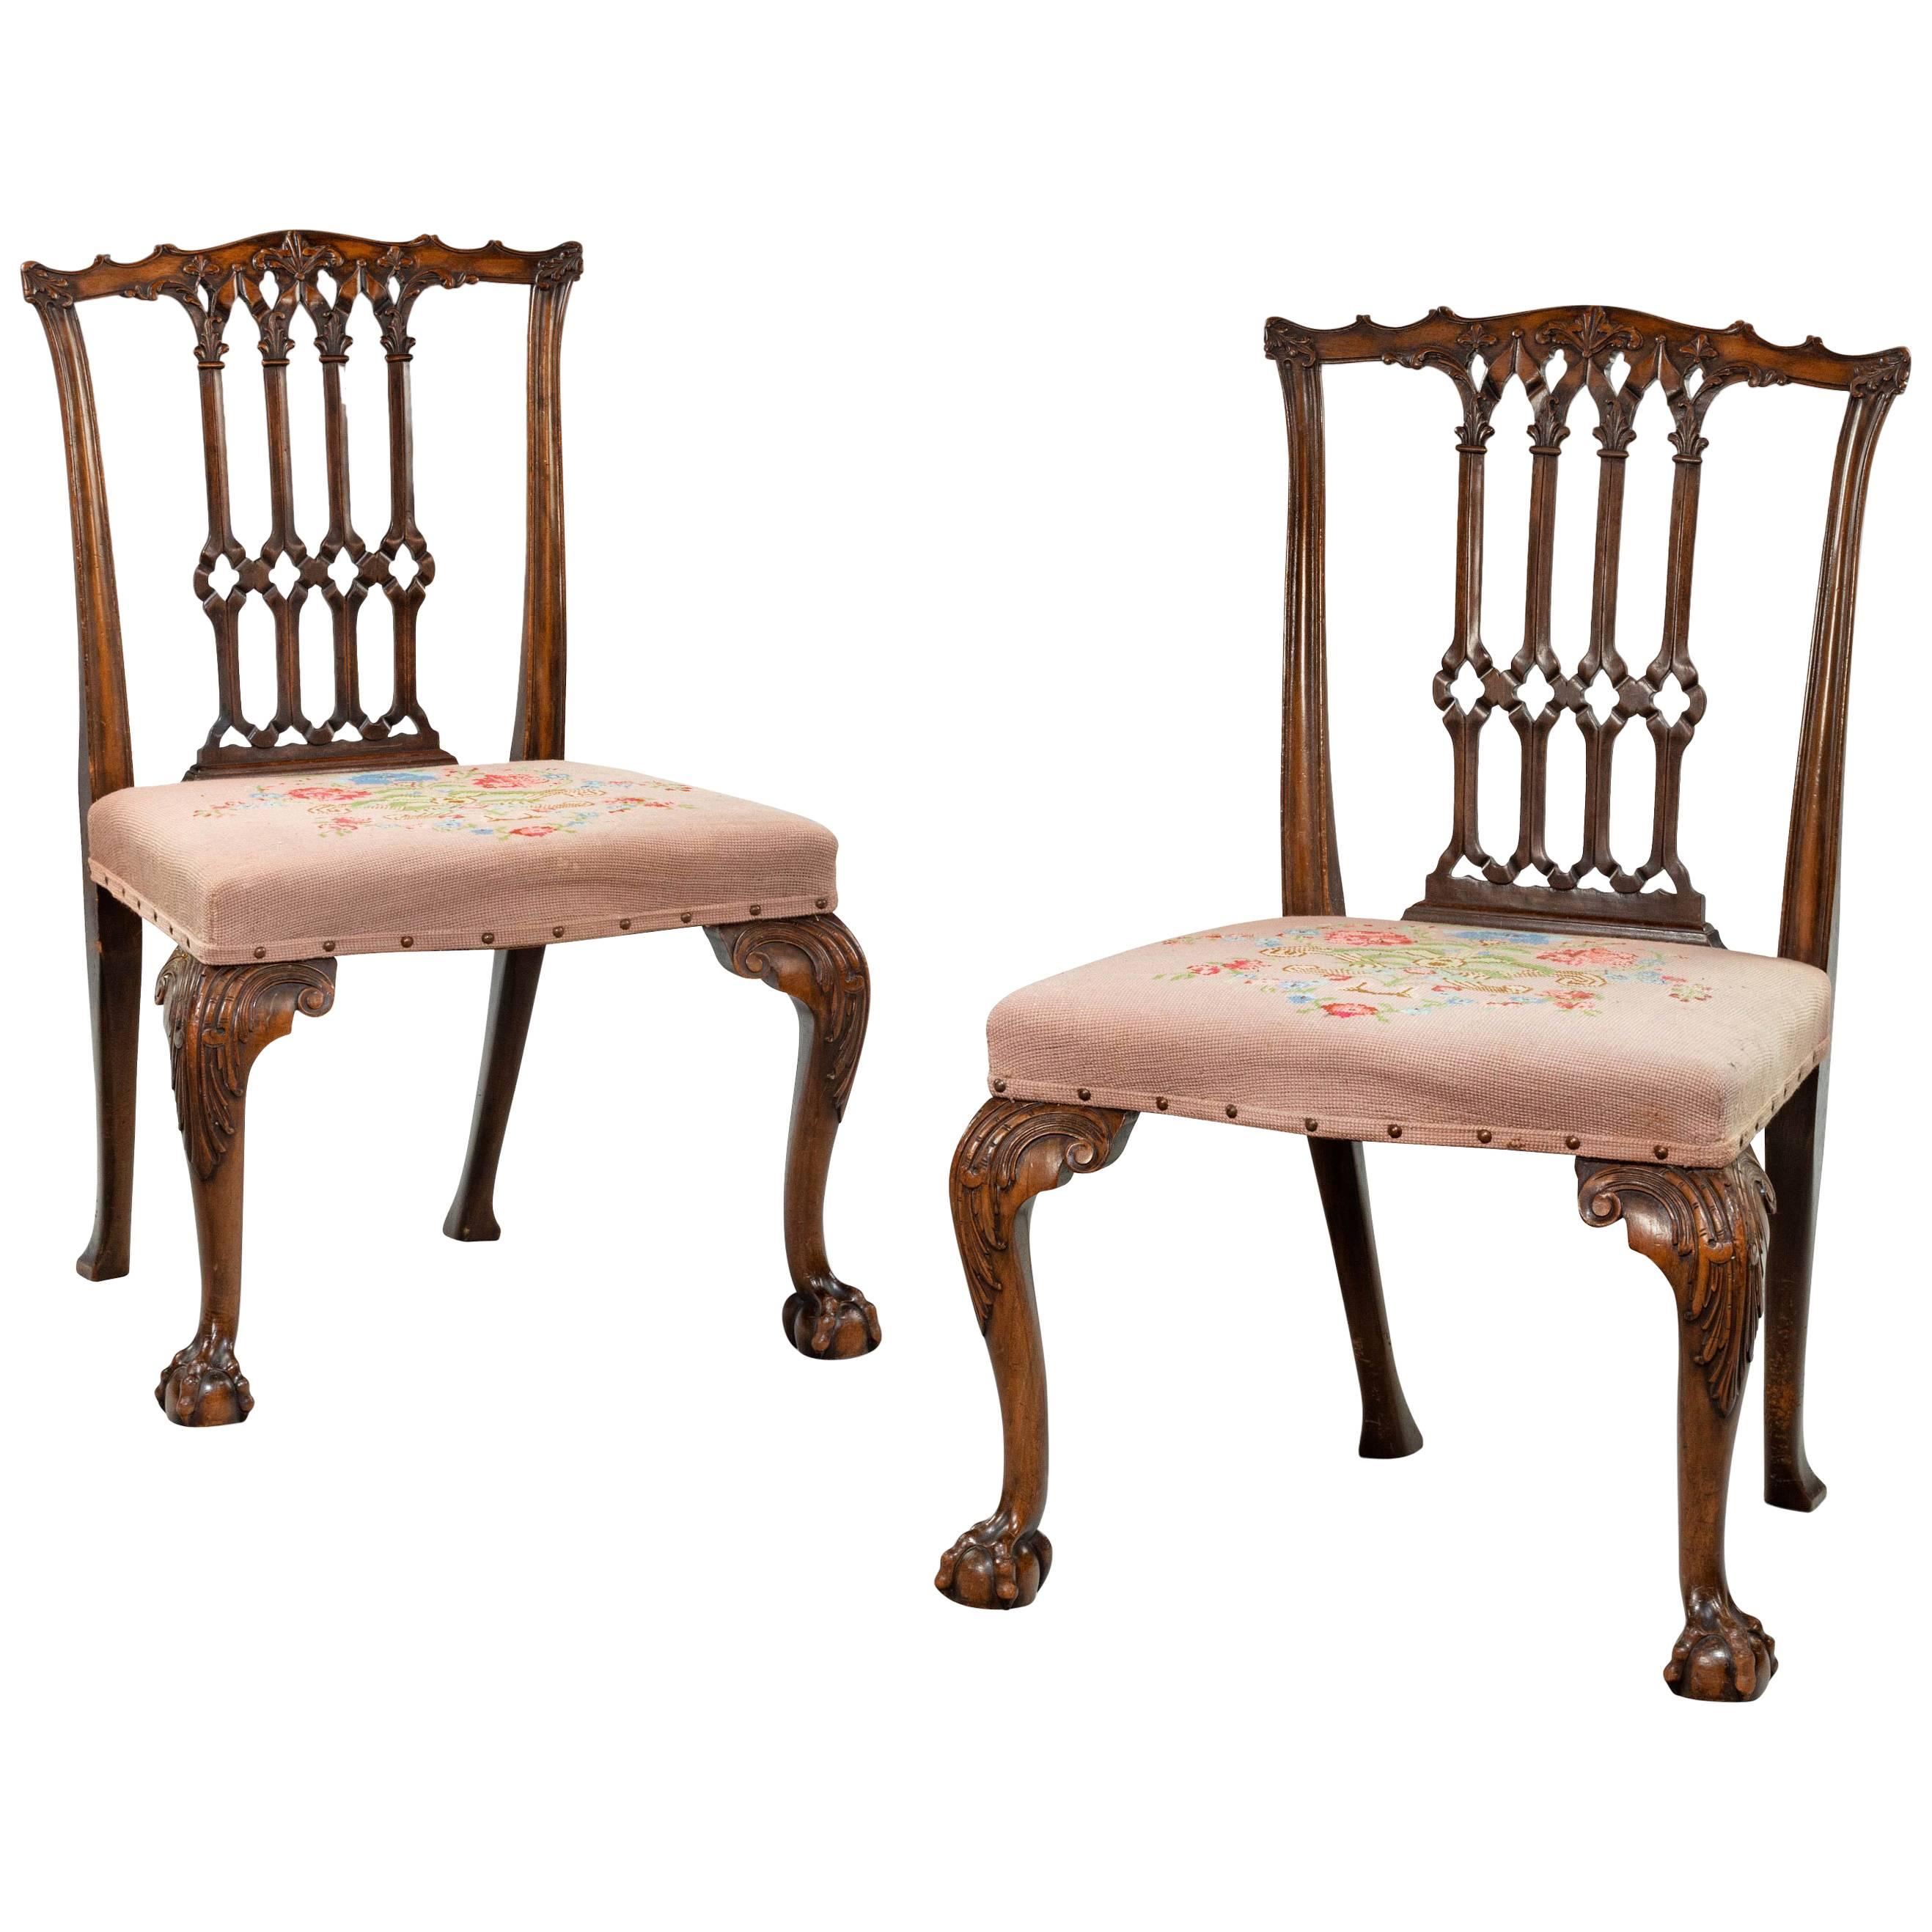 Pair of Late 19th Century Chippendale Design Mahogany Framed Chairs